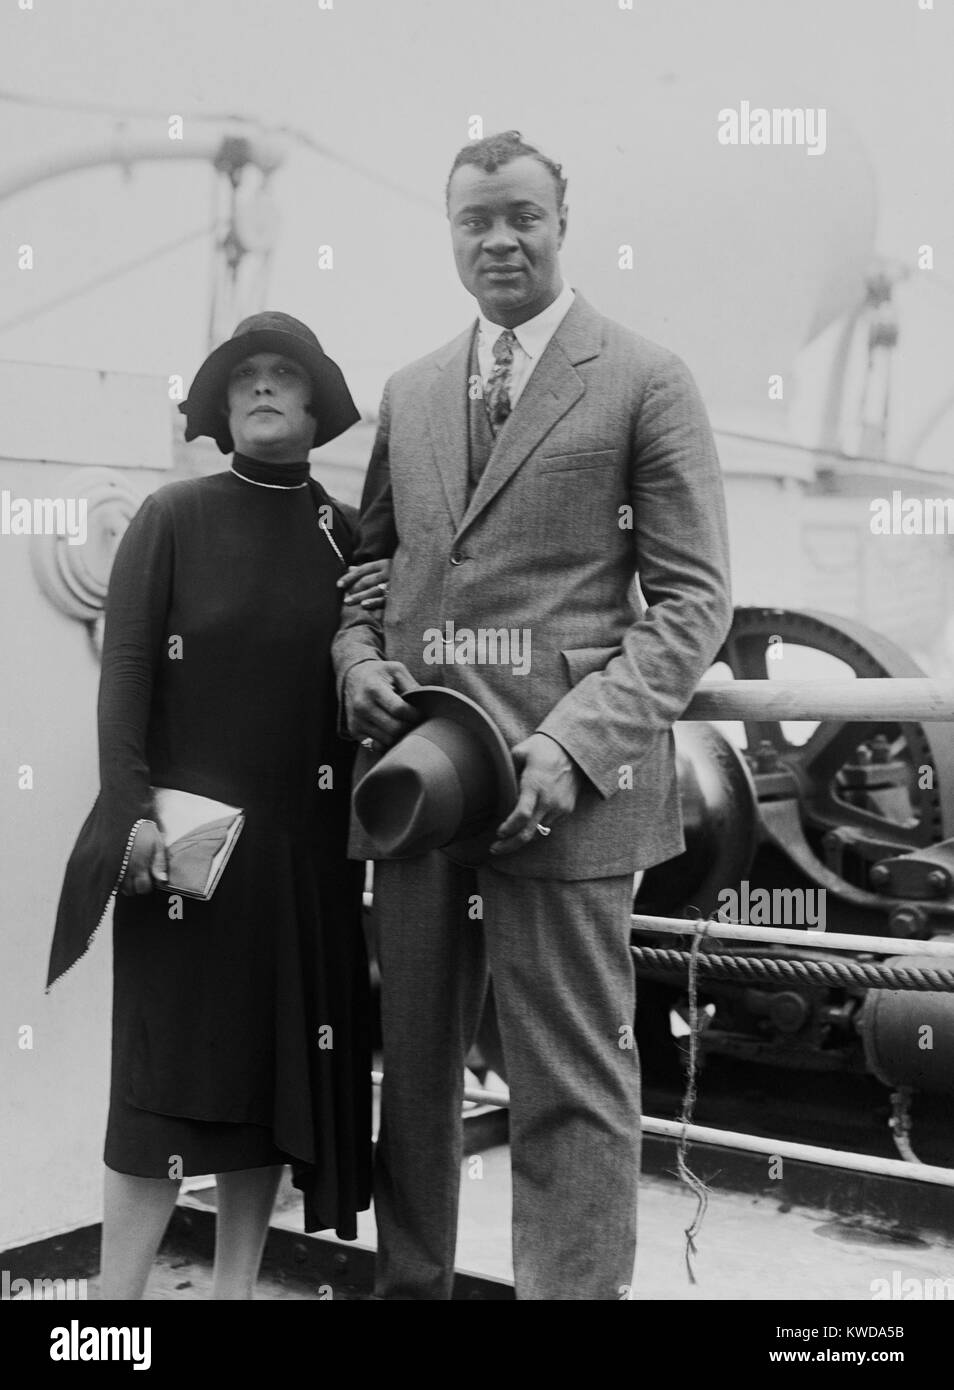 African American heavyweight Boxer Harry Wills and his wife, ca. 1925. Wills was ranked as the number one challenger for the championship. In the 1920s, many white fighters refused to fight Blacks. Jack Dempsey and Wills signed a contract for a 1926 the bout, but the finances collapsed, canceling the fight. (BSLOC 2015 17 82) Stock Photo